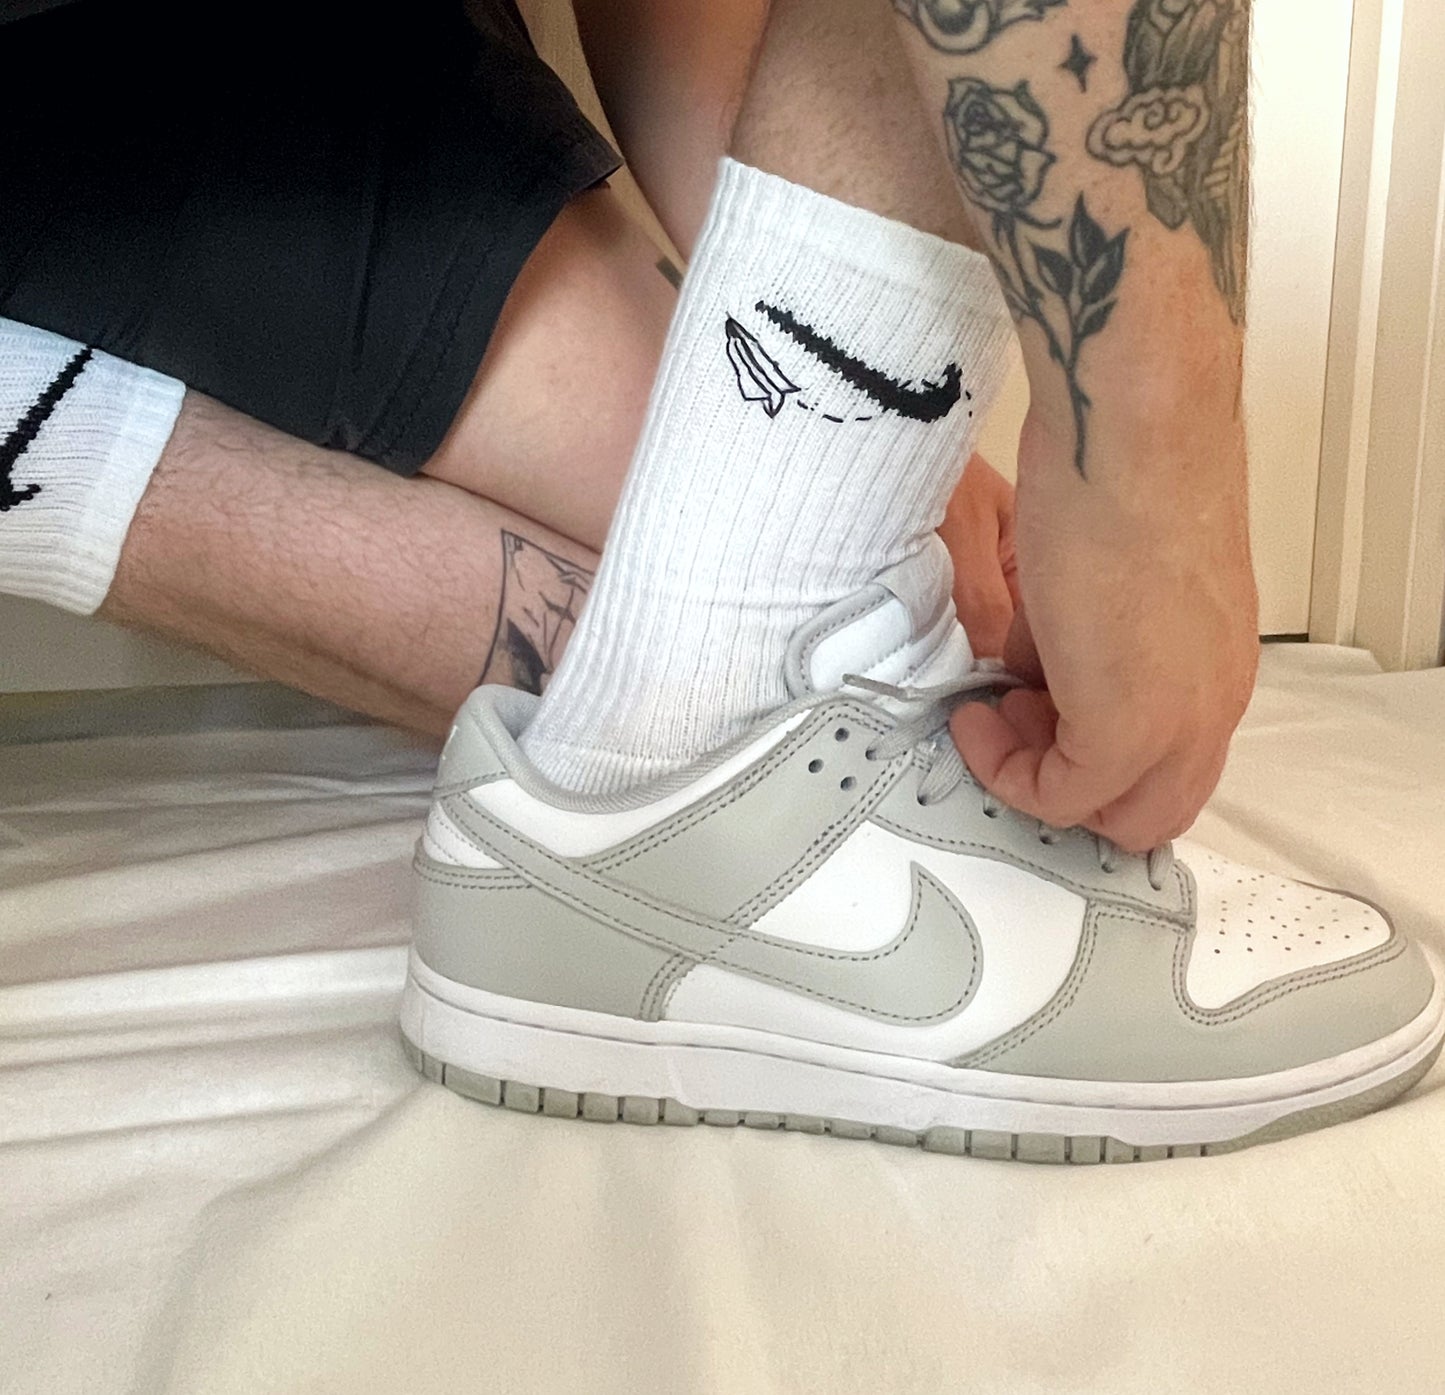 Paper Plane Nike Socks, Hand Embroidered